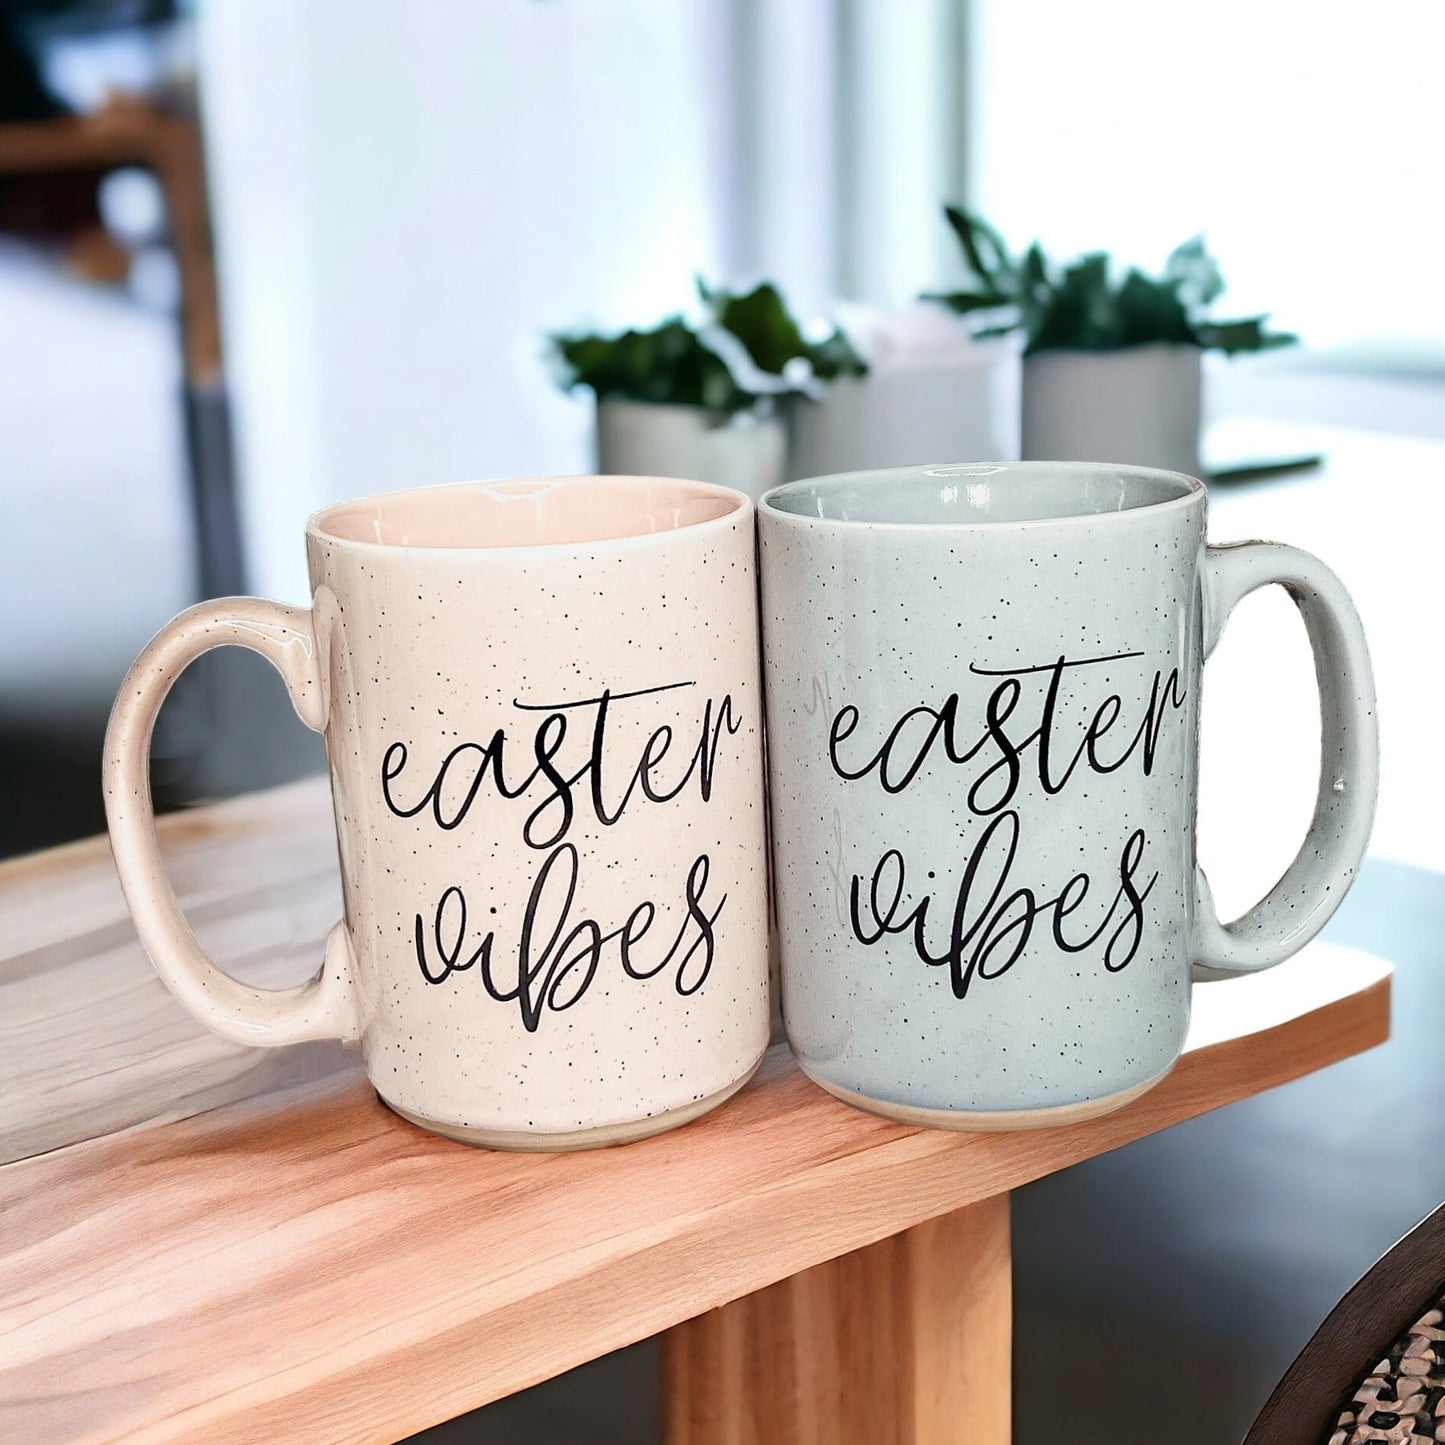 Easter Vibes Coffee Mugs in pastel colors and ceramic